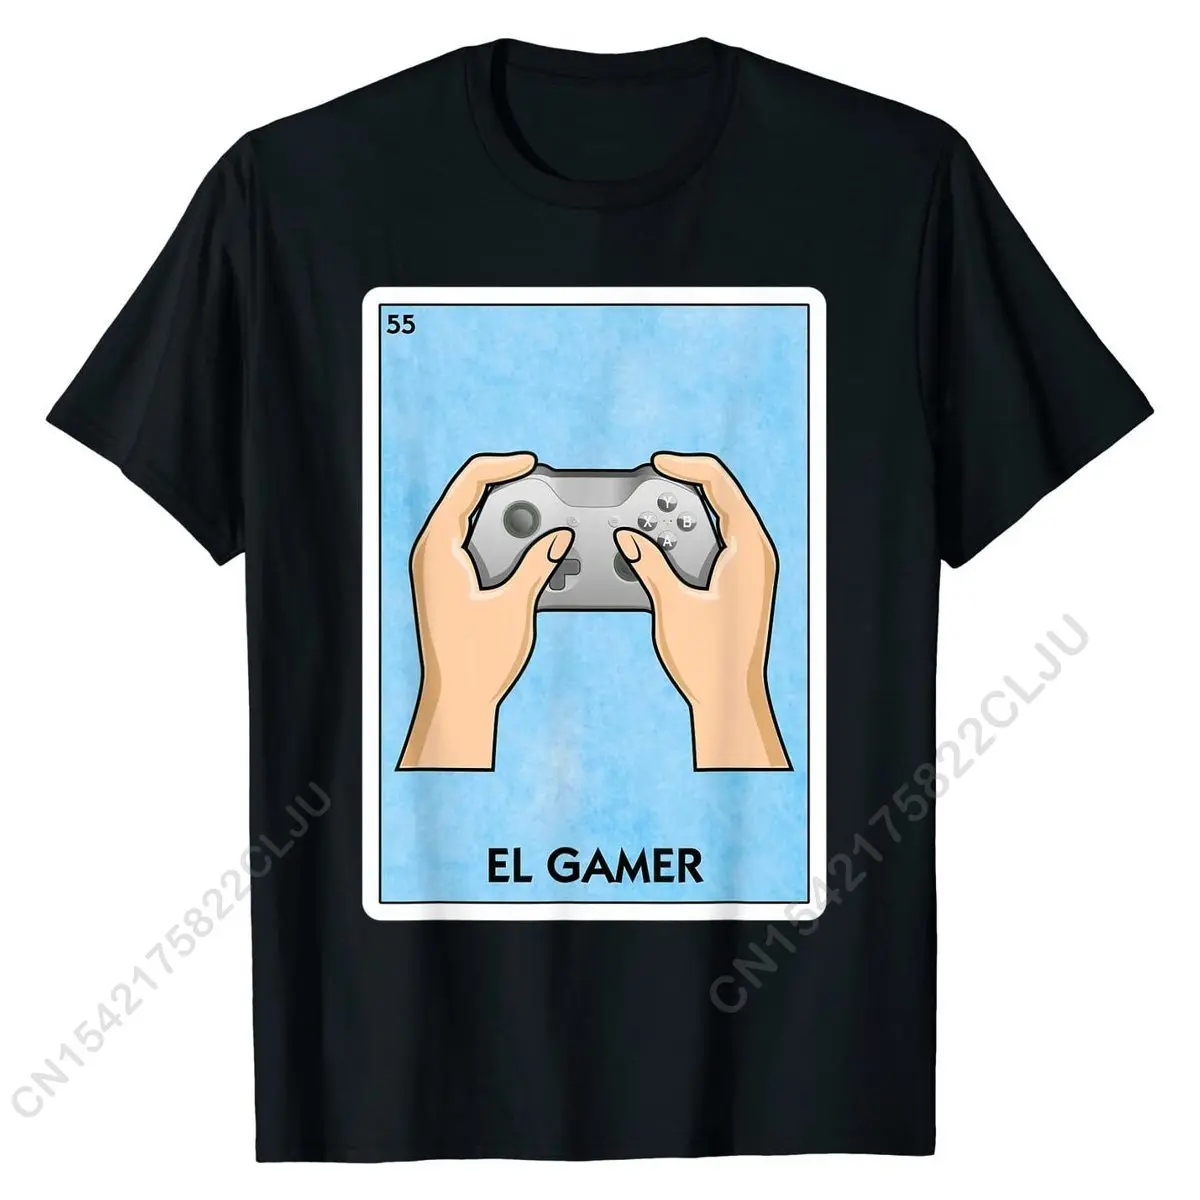 

El Gamer Mexican Card Game - Funny Video Game Player Playing T-Shirt Cotton Men Tops Shirts Classic Tshirts Printed On Funny